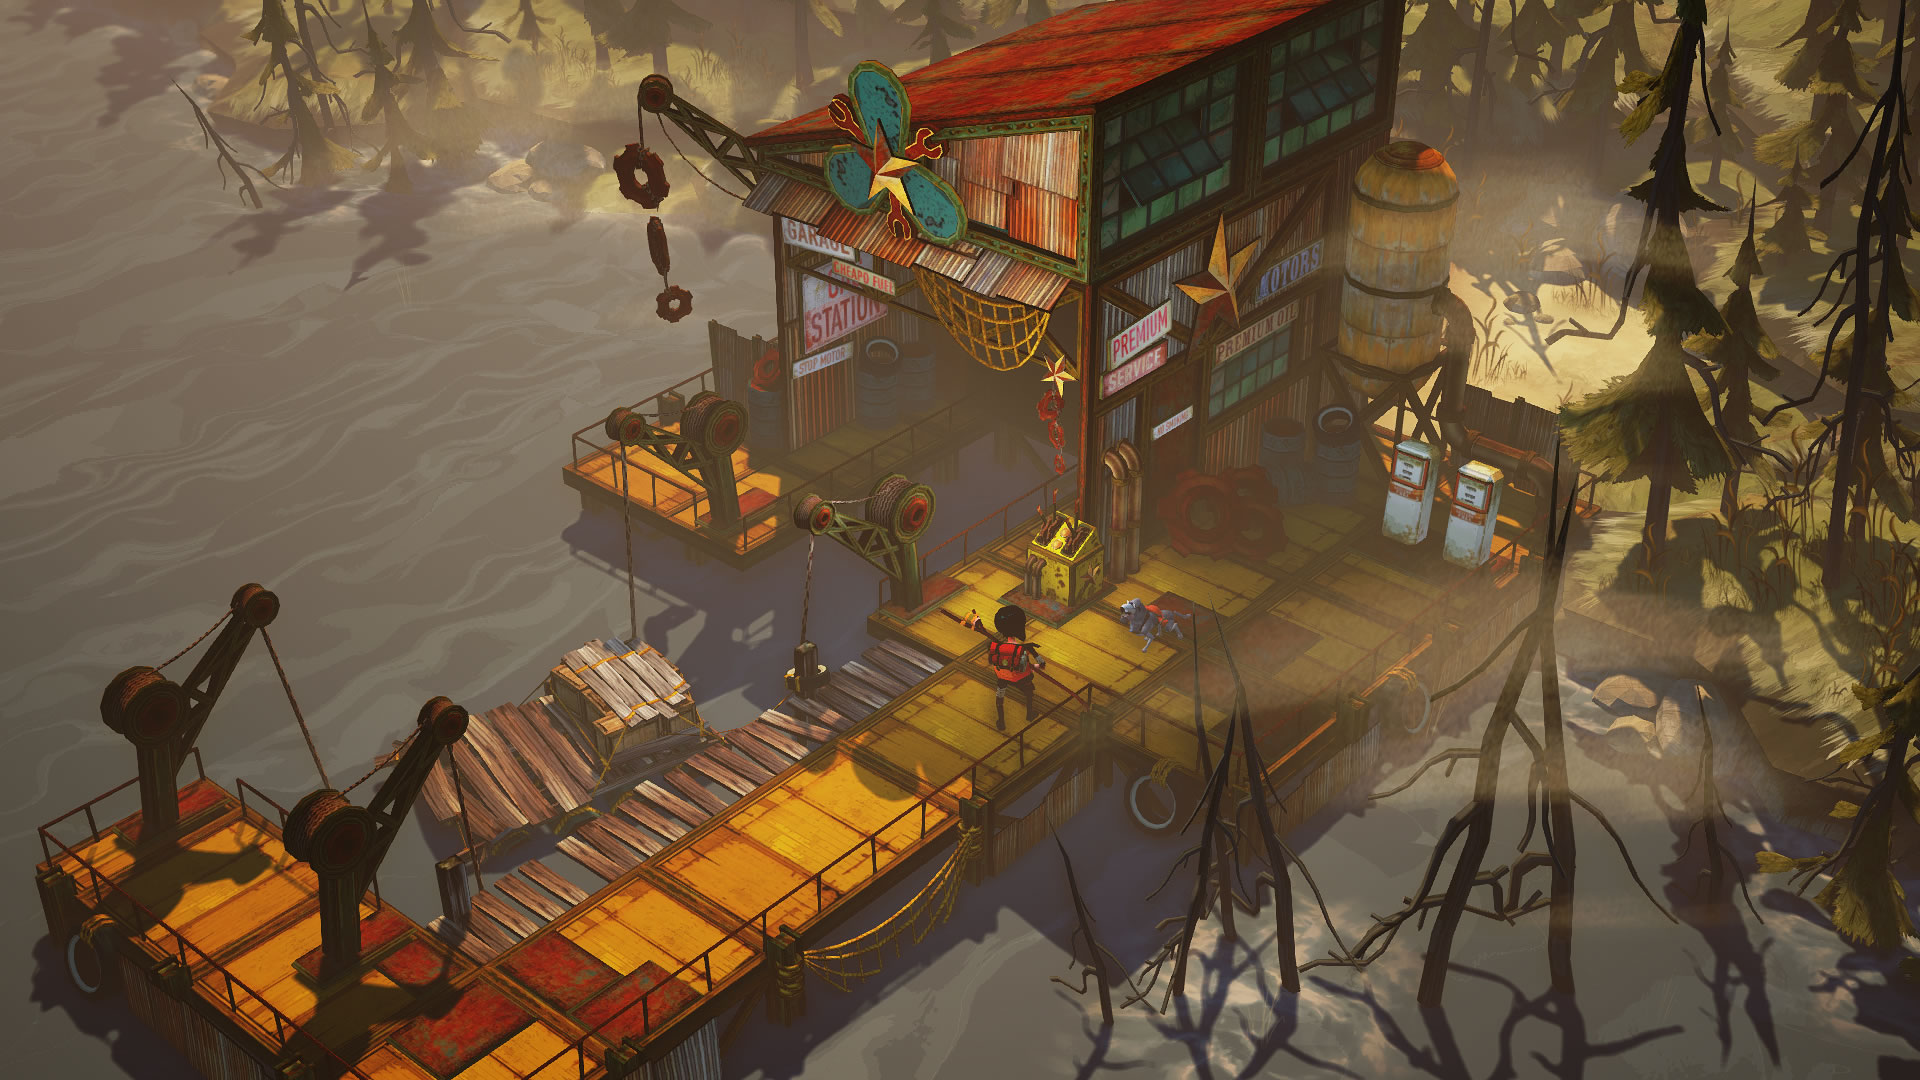 Action, Action & Adventure, adventure, Curve Digital, indie, Rating 7/10, Roguelike, survival, The Flame in the Flood, The Flame in the Flood Review, The Molasses Flood, Xbox One, Xbox One Review